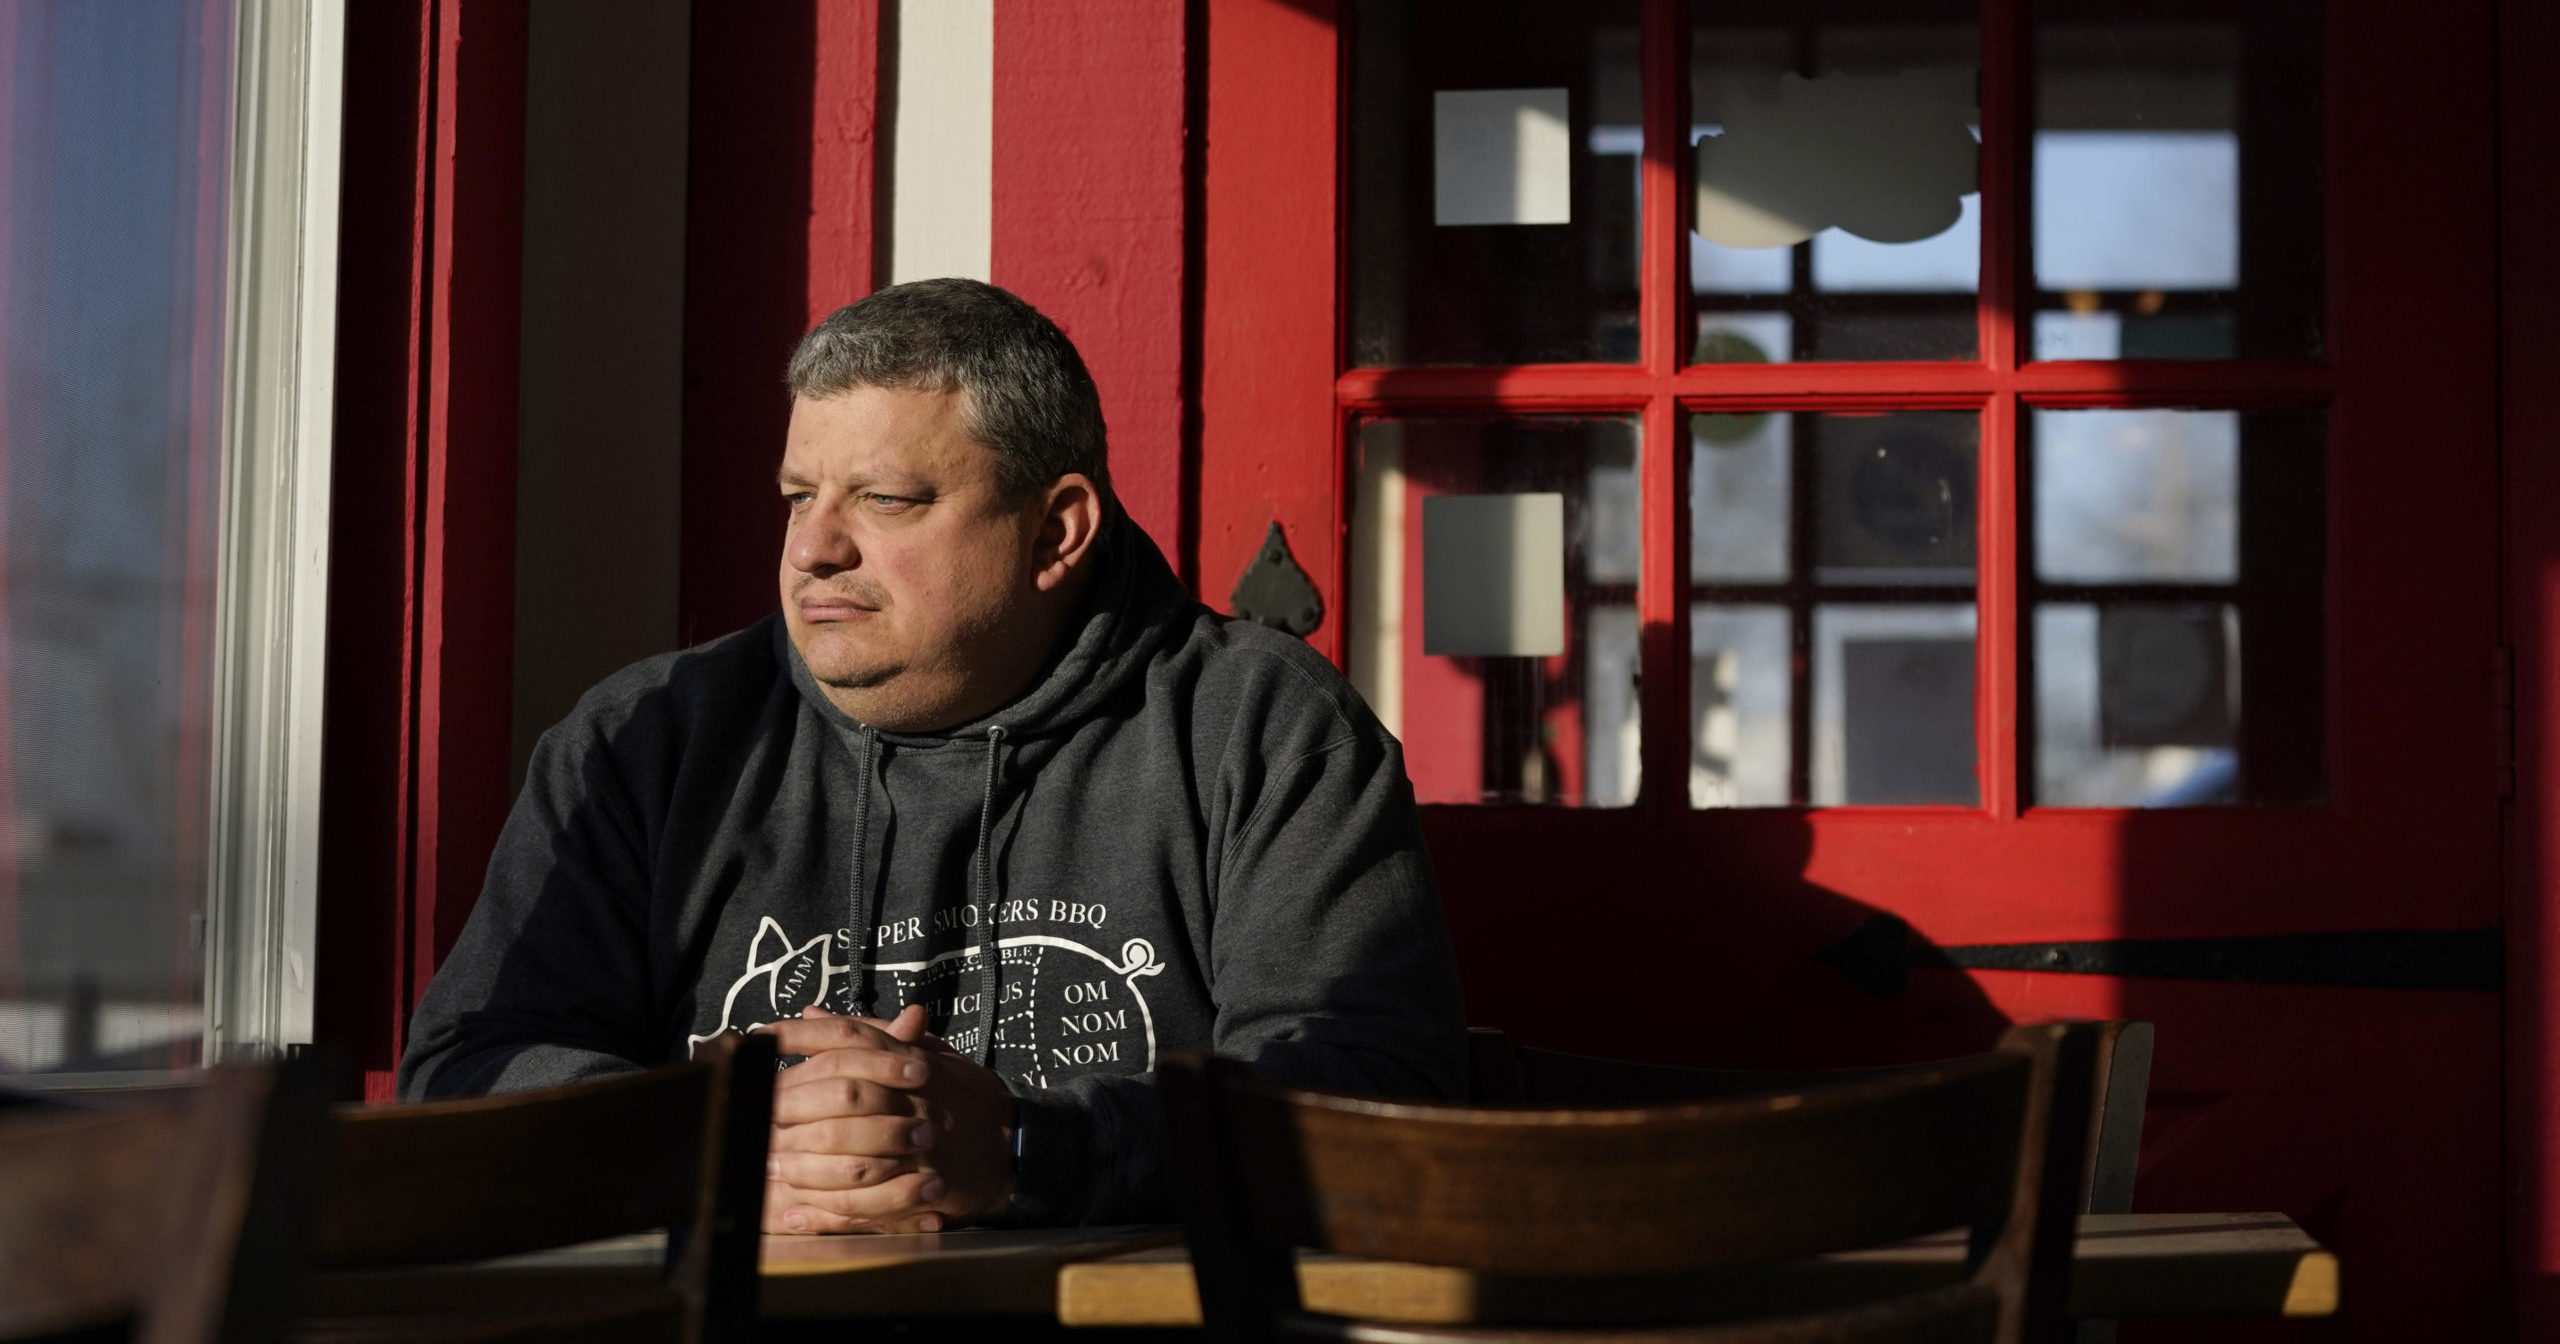 Jeff Fitter, owner of Super Smokers BBQ, poses for a photo inside his restaurant on Jan. 28, 2021, in Eureka, Missouri. Fitter says his profits were down by about half last year due to the closures and capacity limits imposed by St. Louis County.